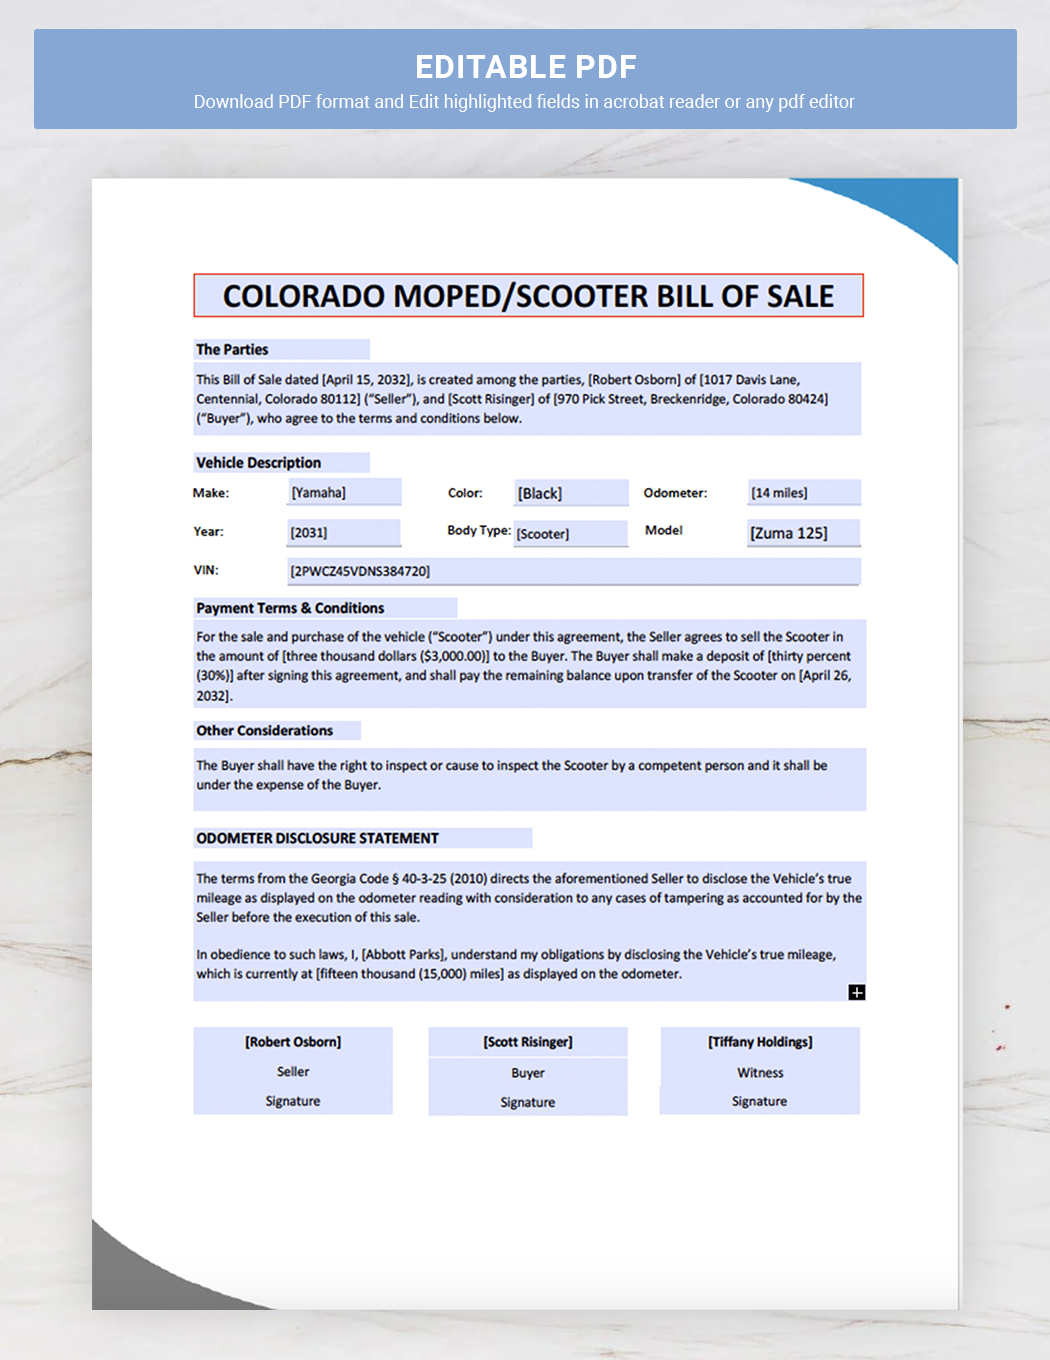 Colorado Moped / Scooter Bill of Sale Template